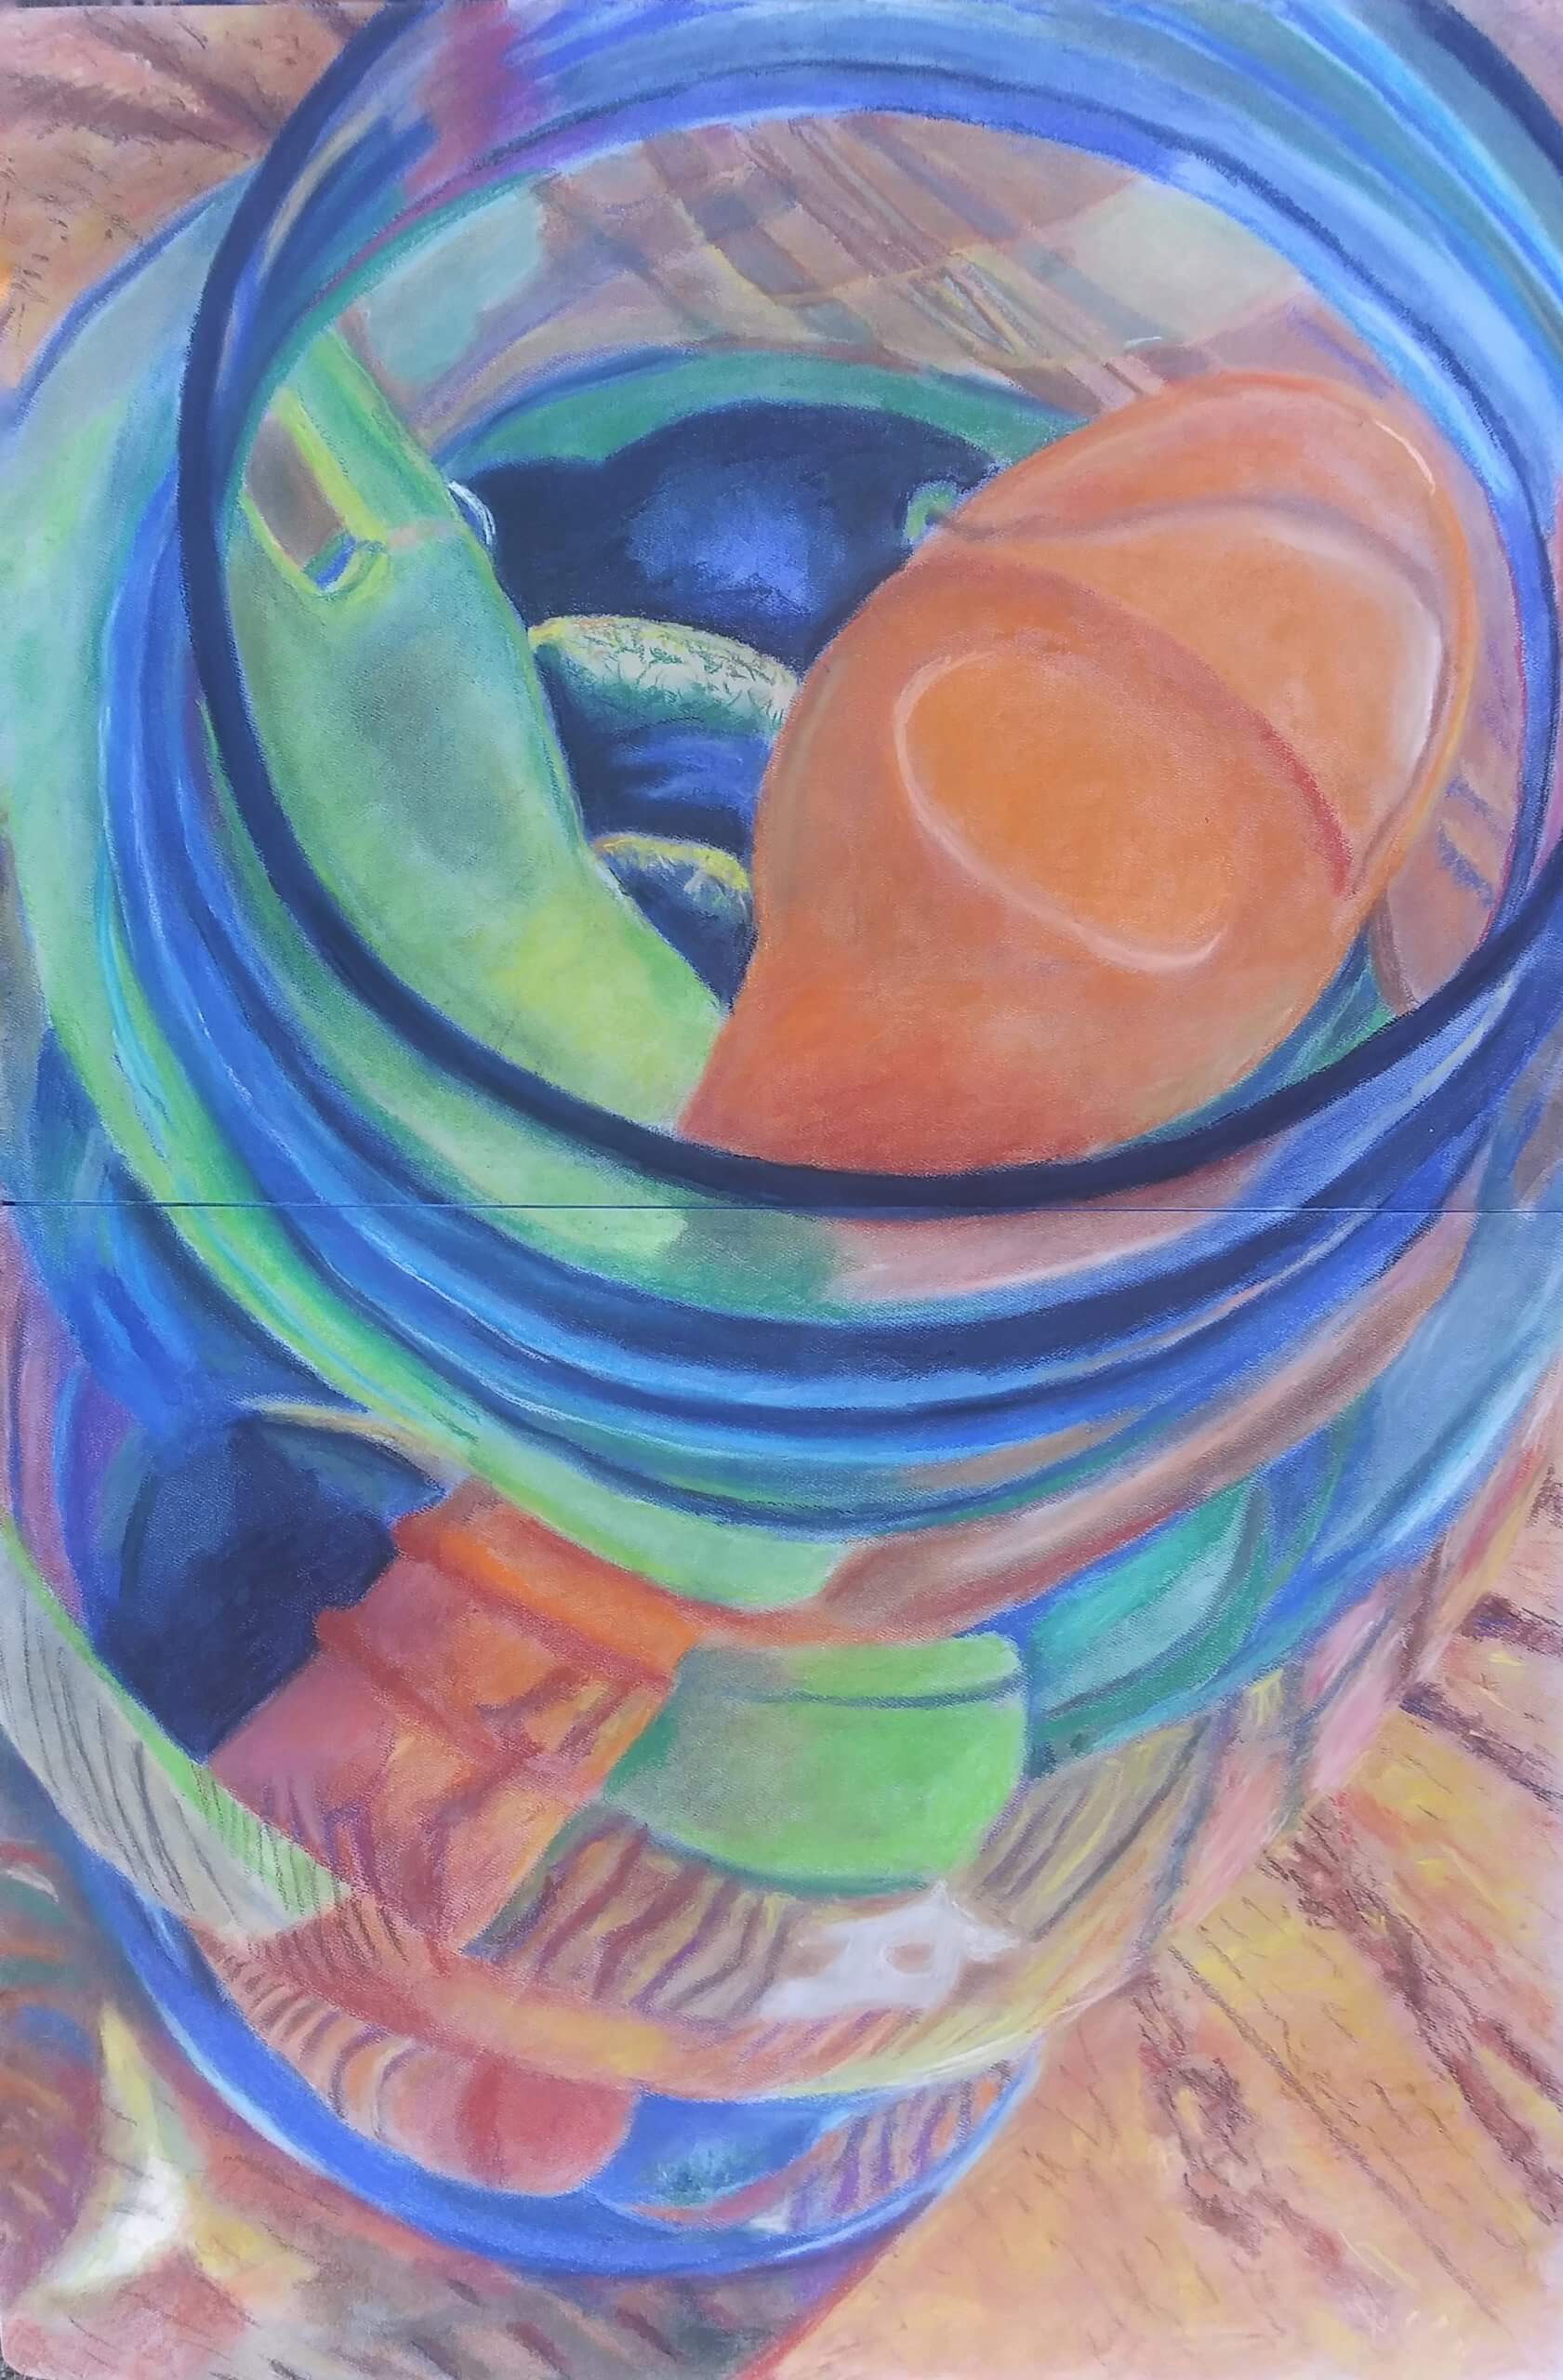 Lisette Pascual Adames, "In-Out," Pastel on Paper, 36" x 24"